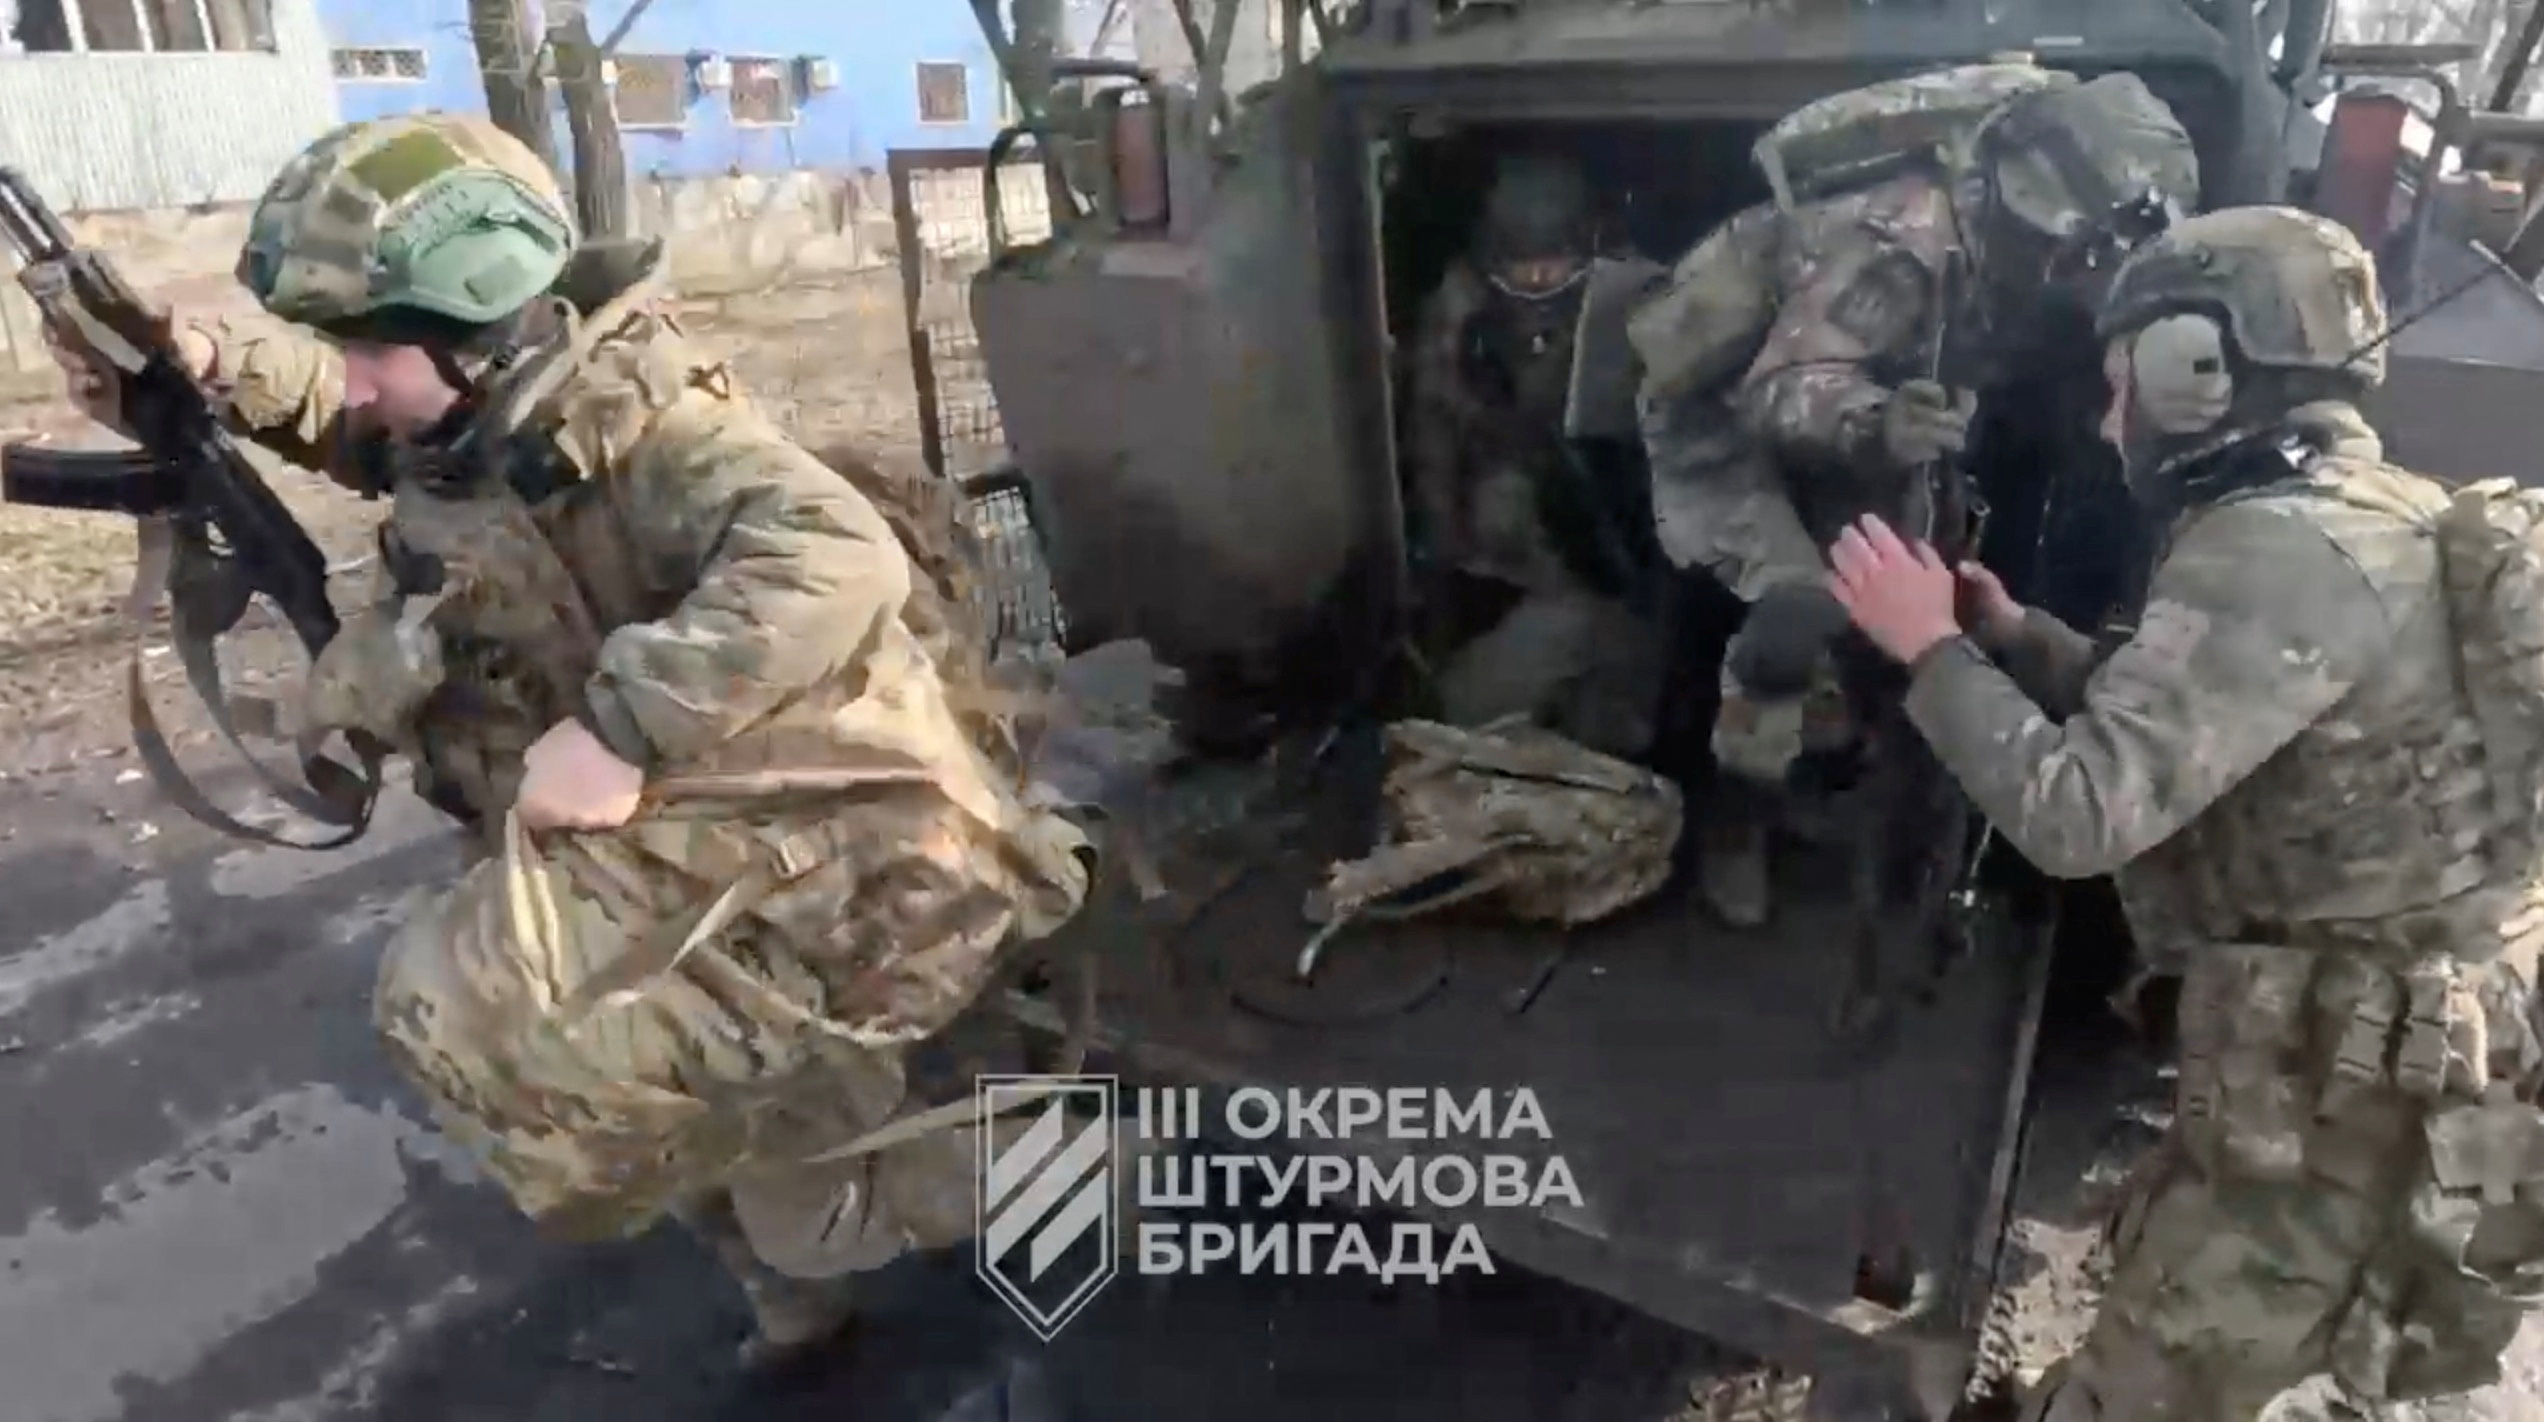 Ukrainian troops left Avdiivka after fighting Russian forces for nearly four months. /Ukraine's Third Assault Brigade 